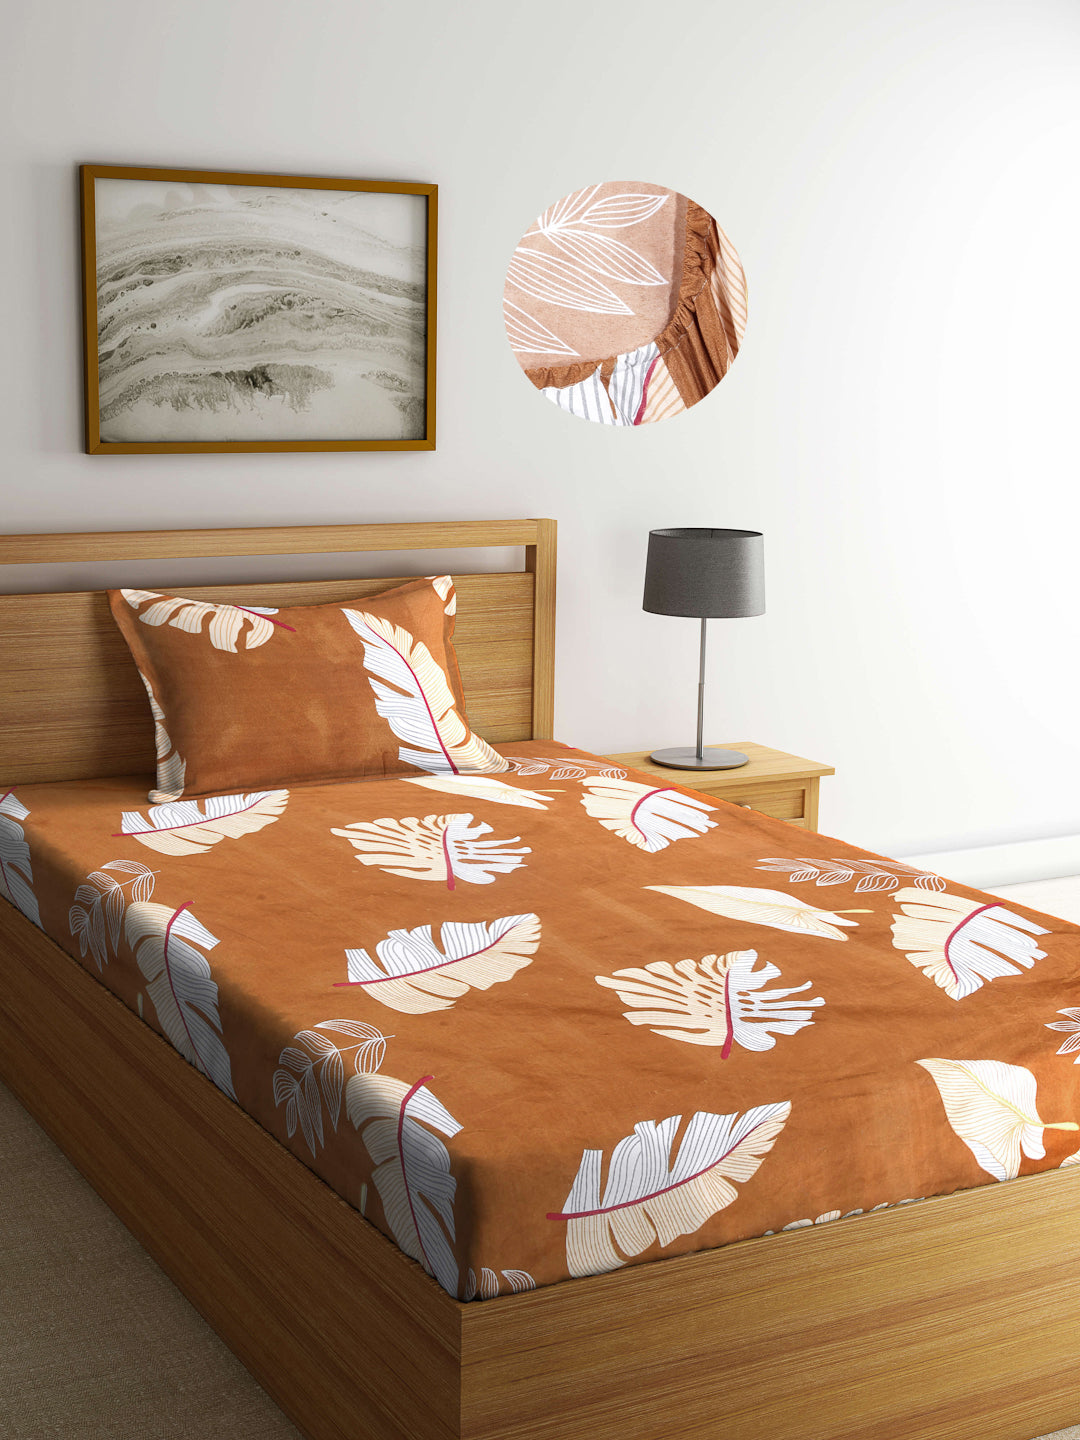 Arrabi Brown Leaf TC Cotton Blend Single Size Fitted Bedsheet with 1 Pillow Cover (220 X 150 cm)